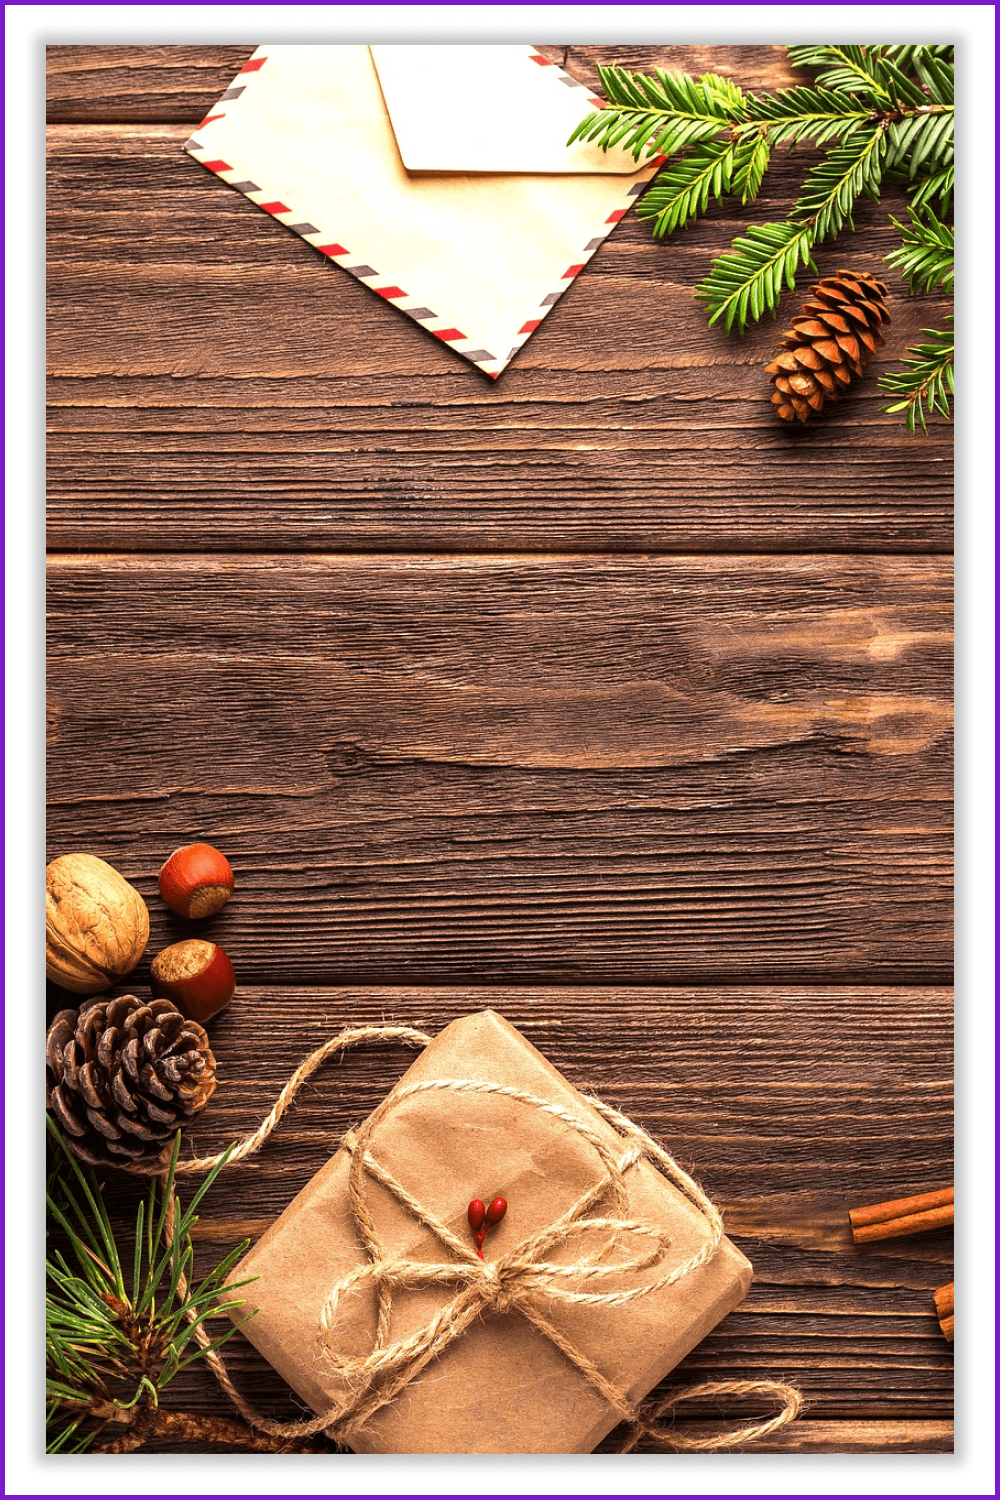 Photo of a wooden table with a gift, an envelope and fir branches on it.